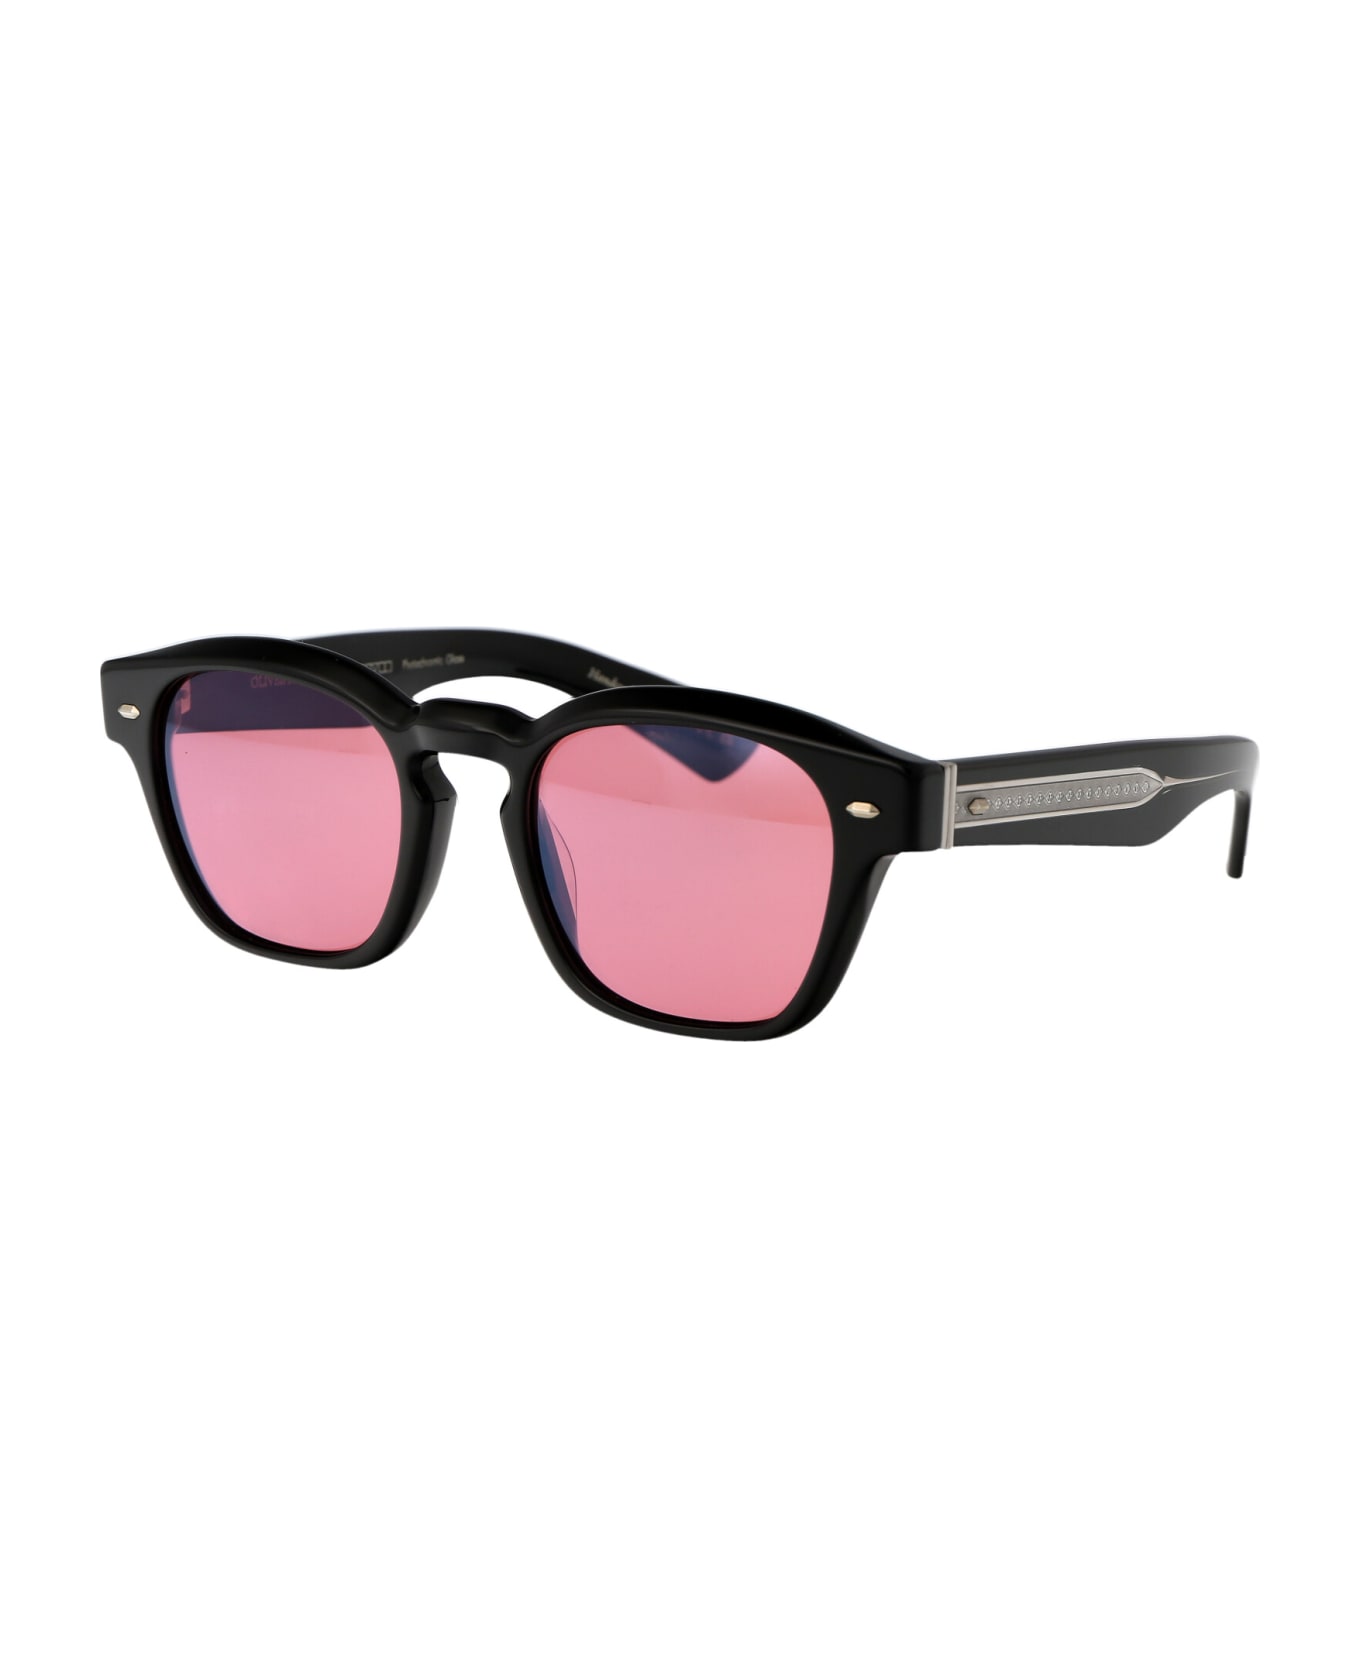 Oliver Peoples Maysen Sunglasses - 14923E Black